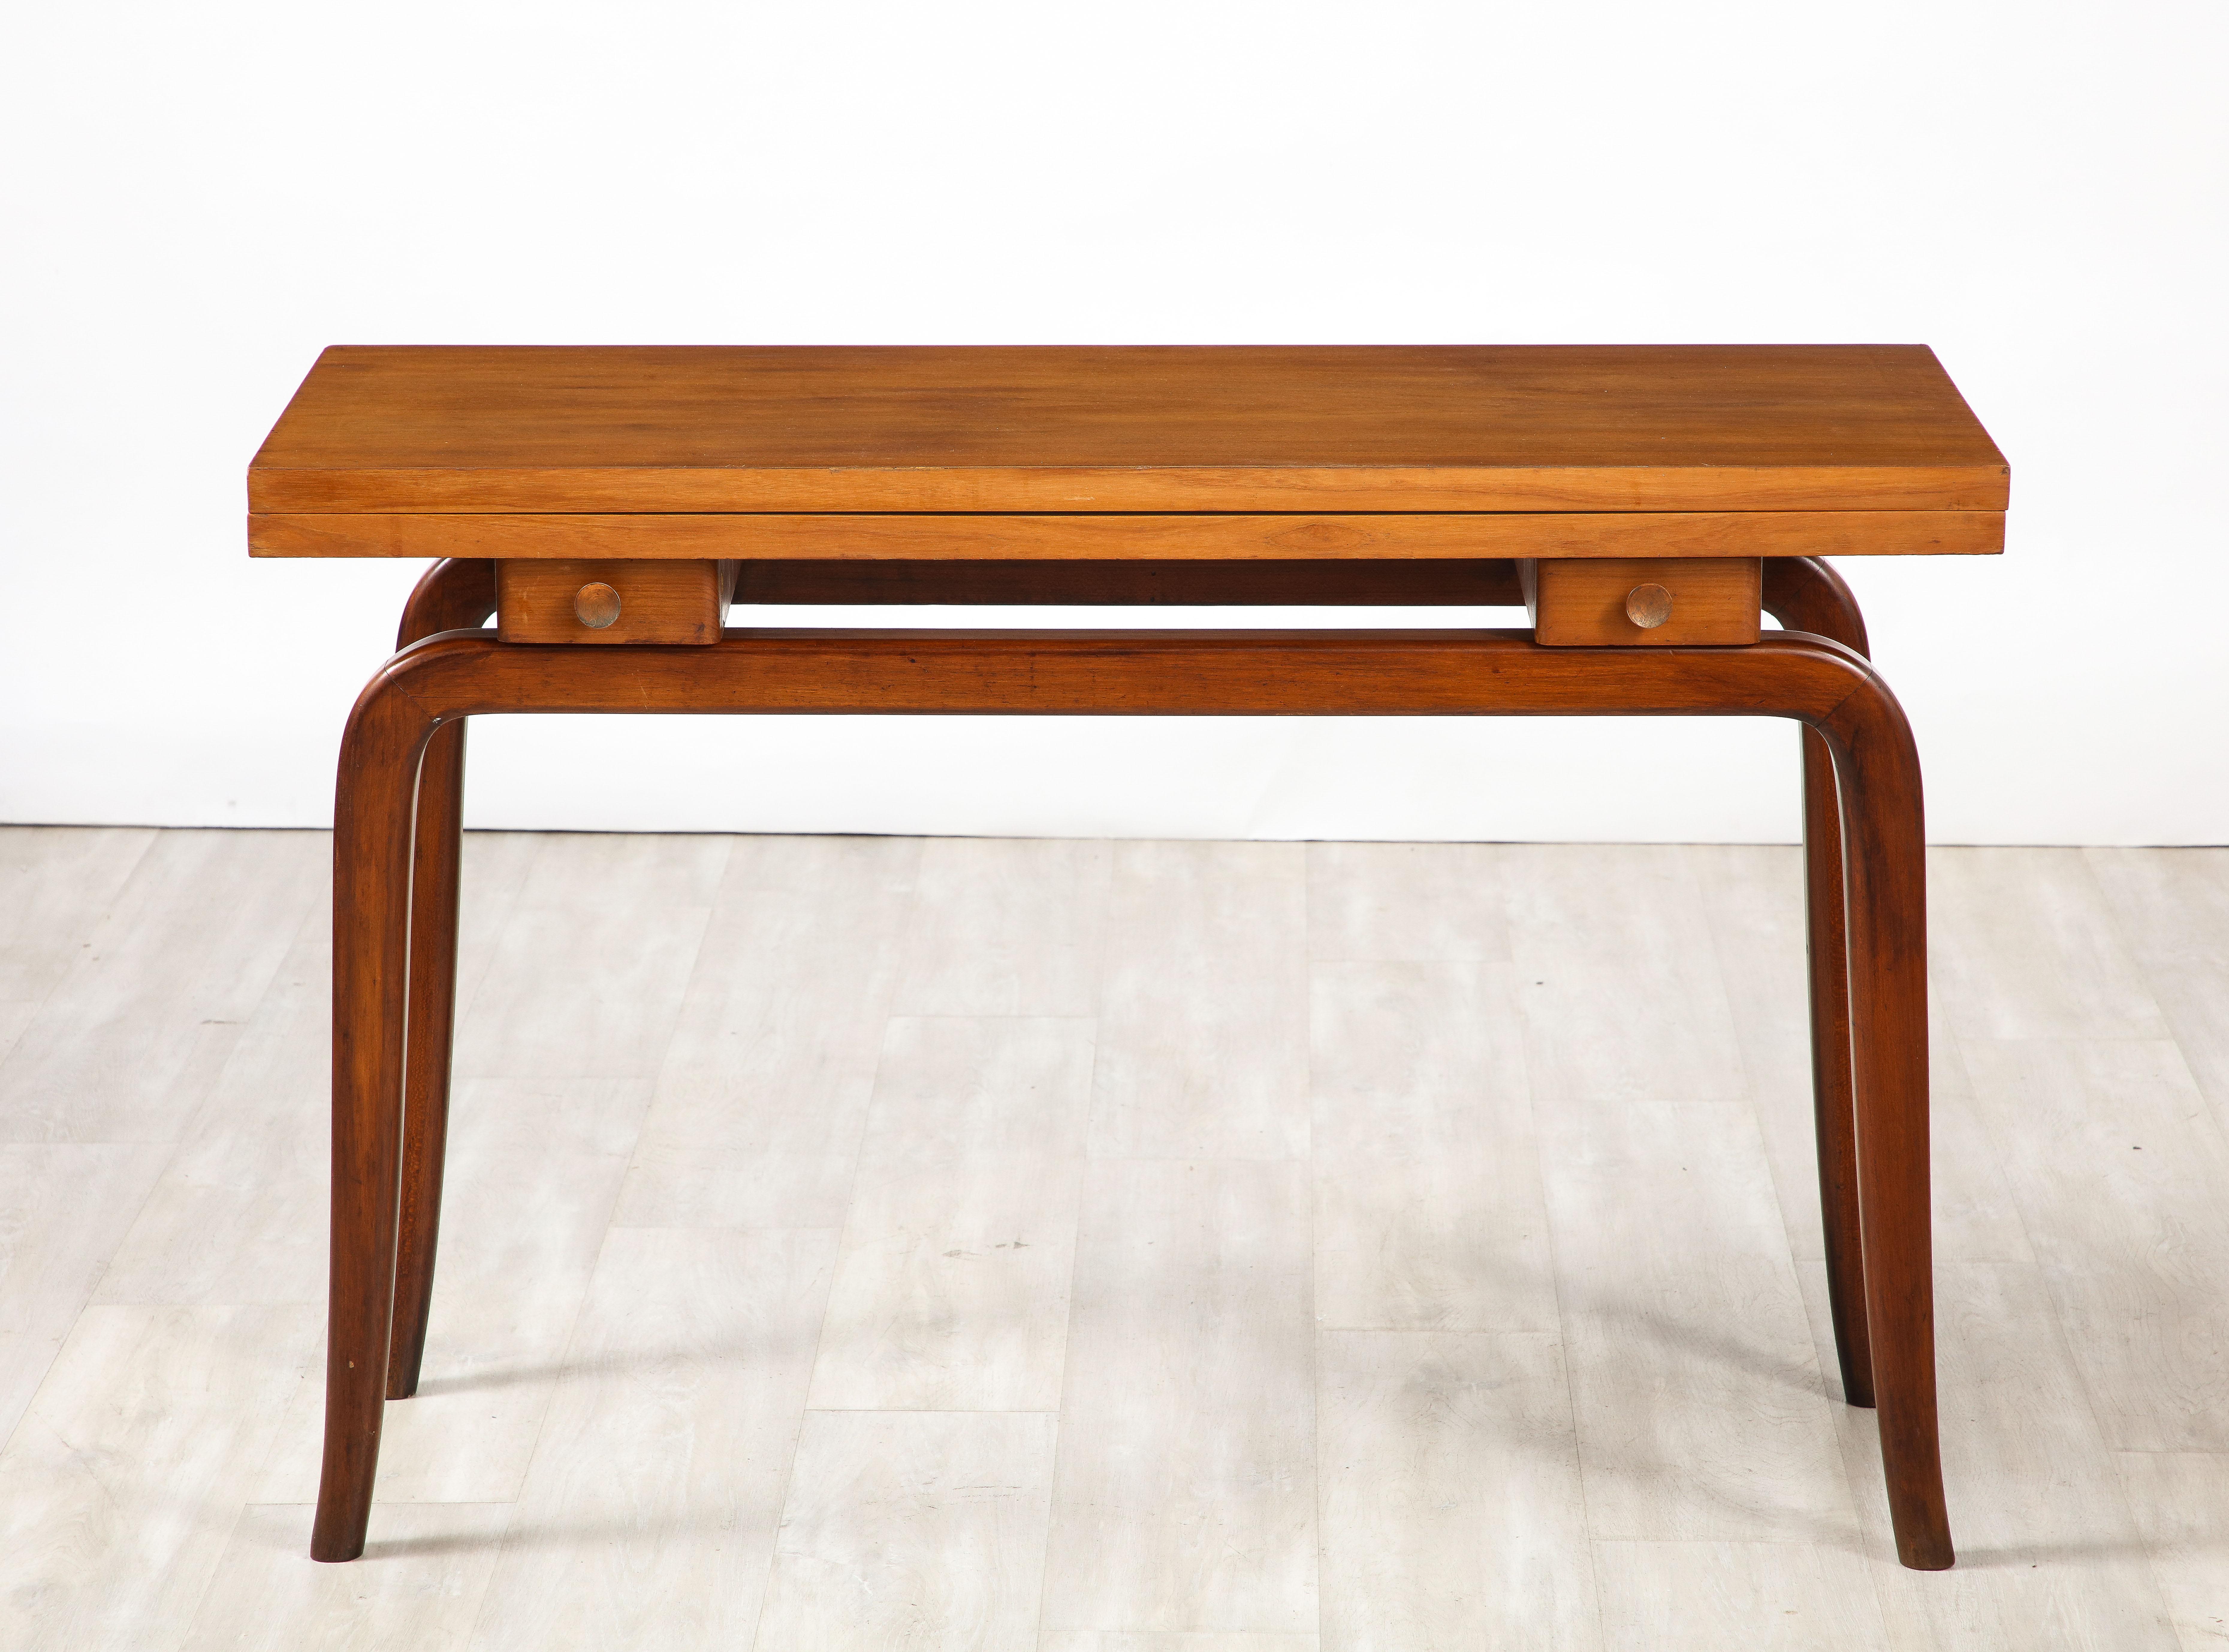 An Italian 1940's folding or flip-top walnut writing desk or console with two faux drawers, the top opens up to a larger surface with a warm beautifully faded pink laminate; highly practical to work on or eat from.  The rectangular walnut top